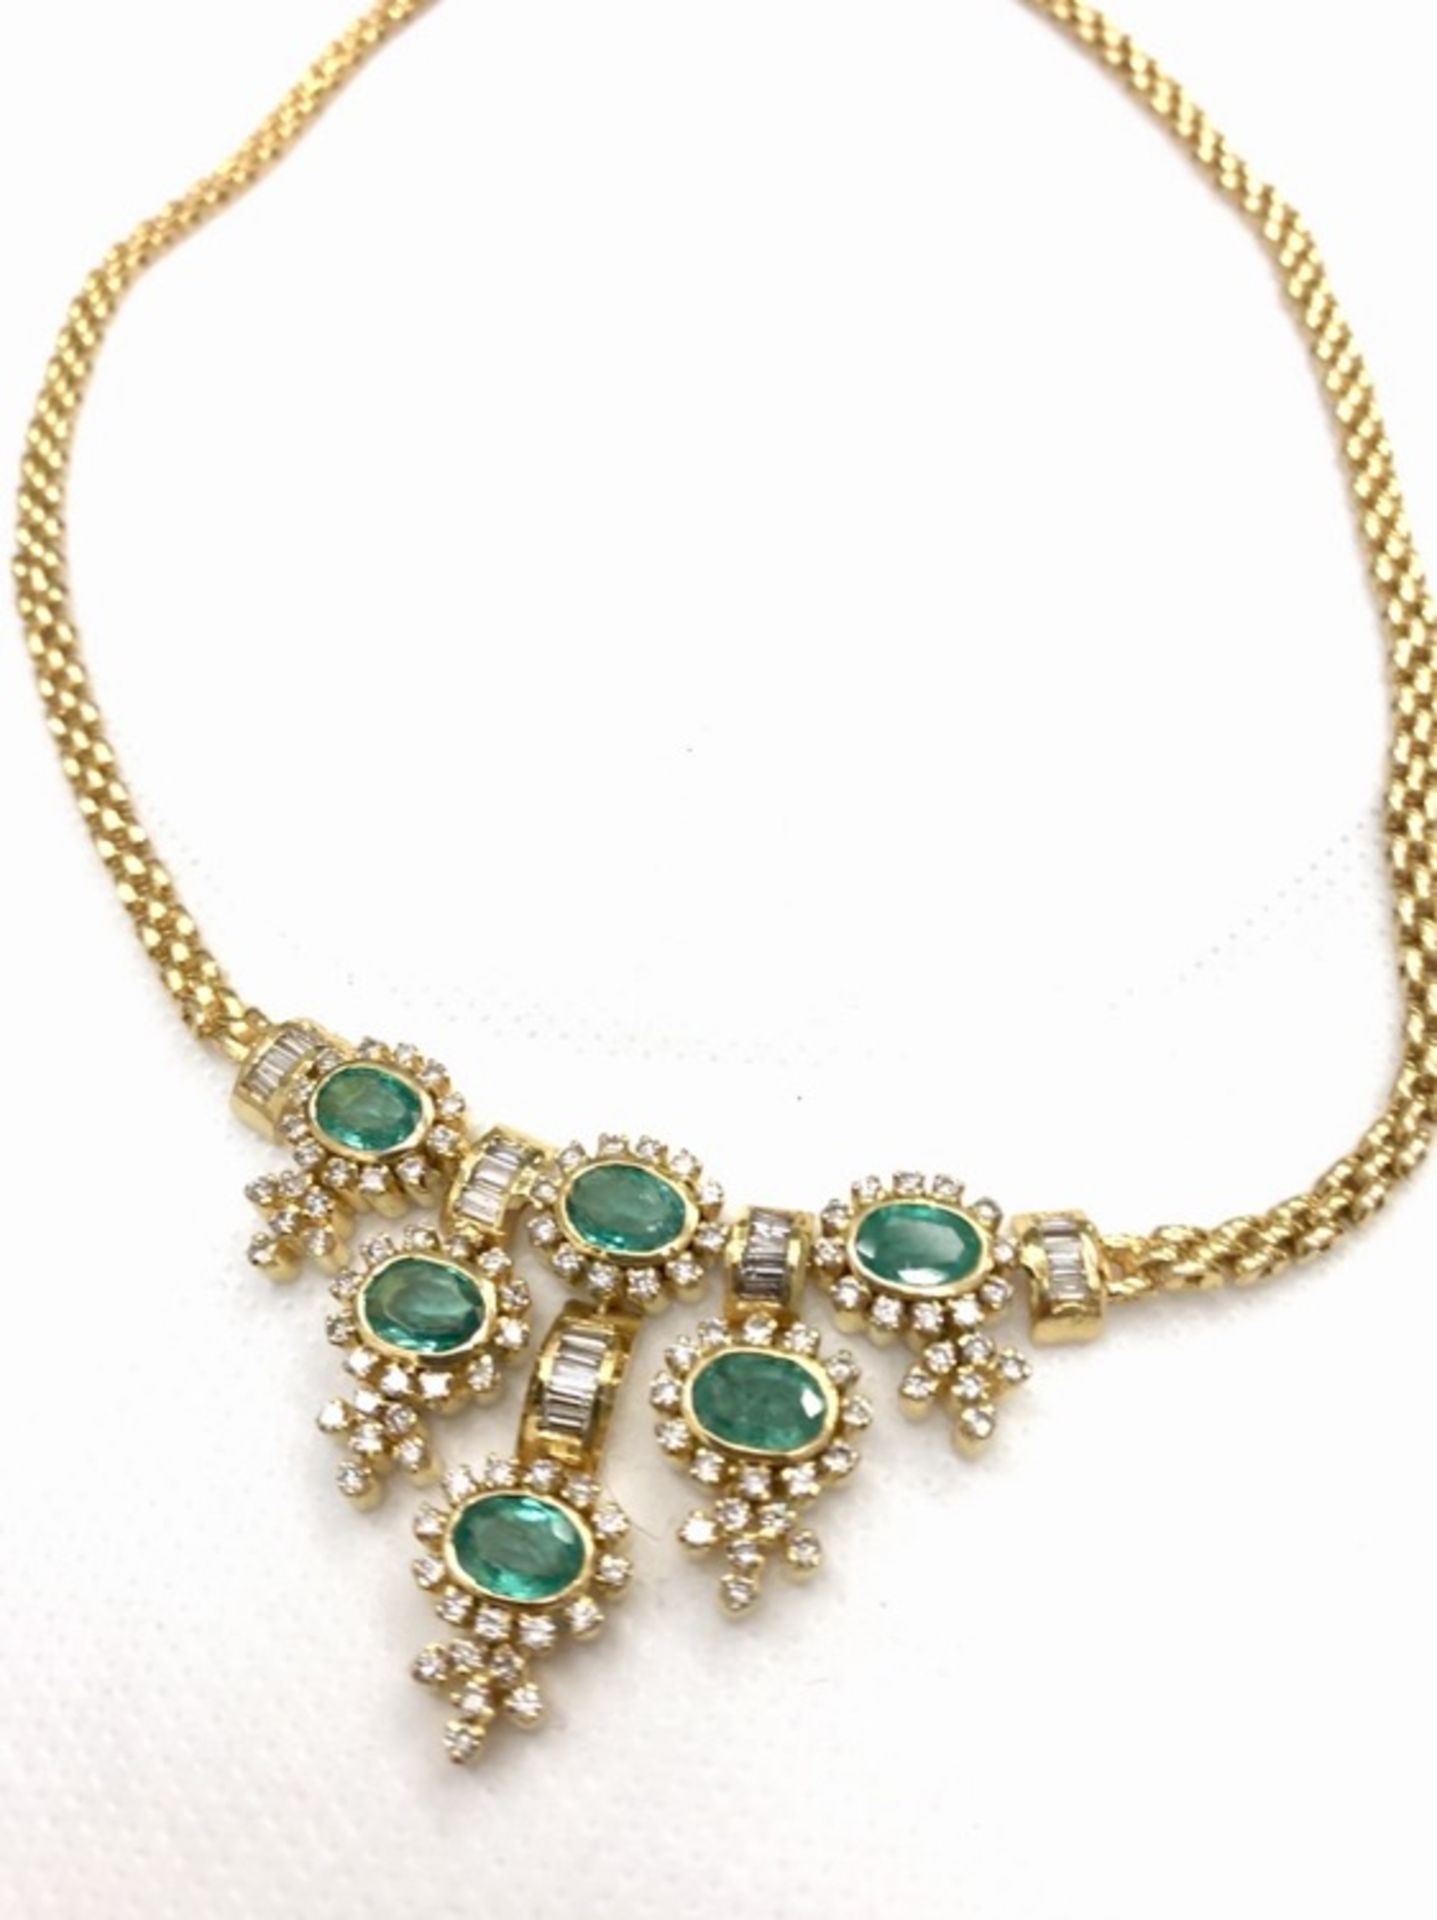 STUNNING EMERALD & DIAMOND NECKLACE WITH PANTHER LINK 18ct GOLD - 32 GRAMS